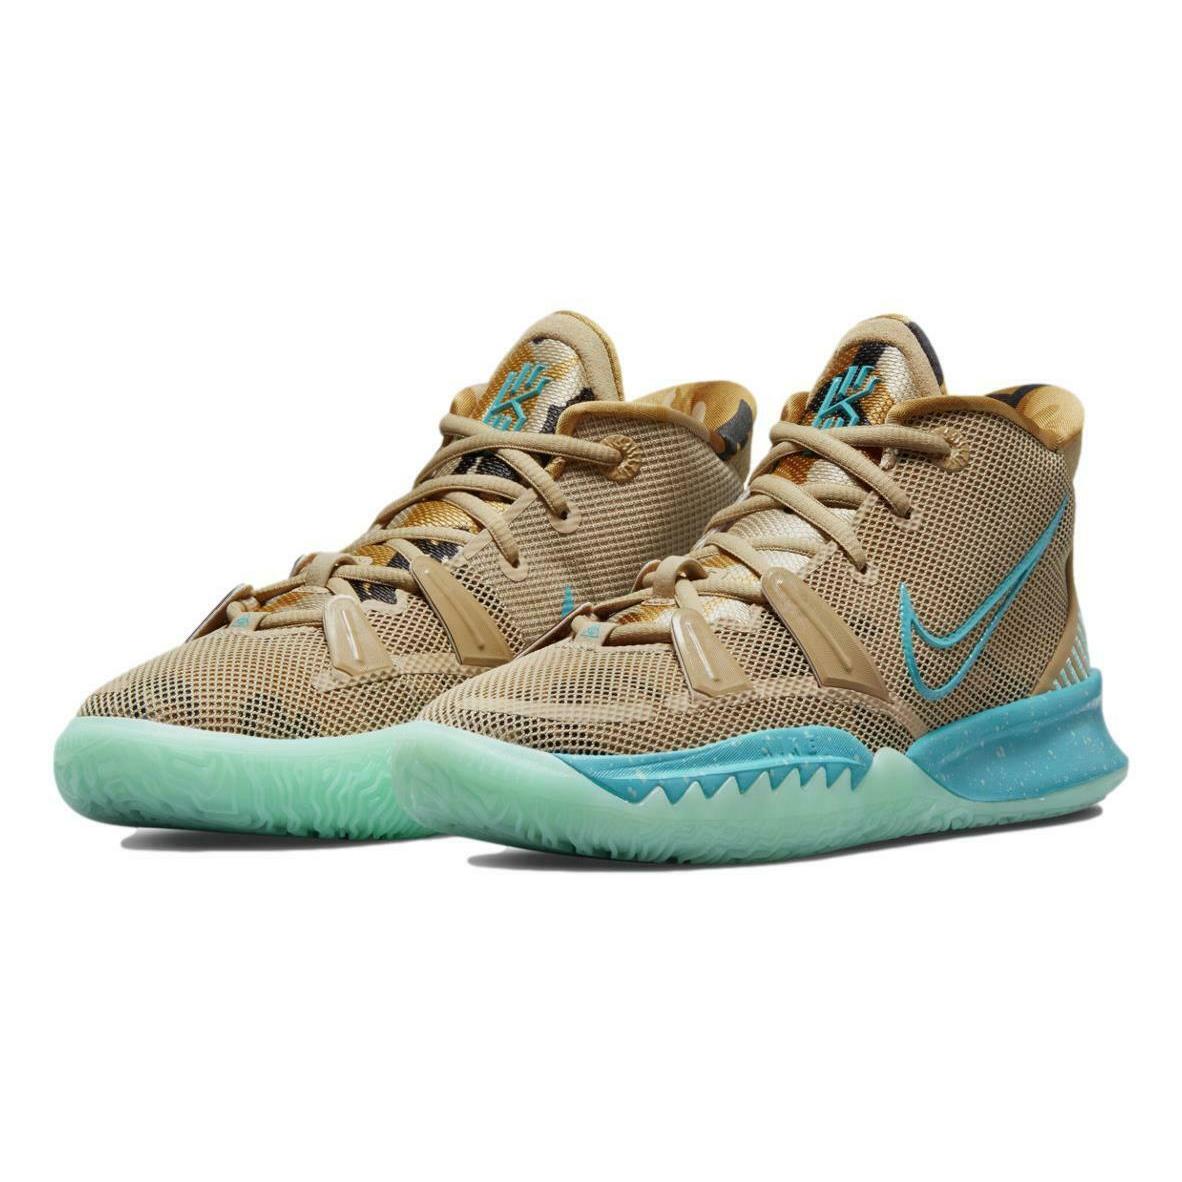 Nike Kyrie 7 GS Ripple Shoes CT4080-207